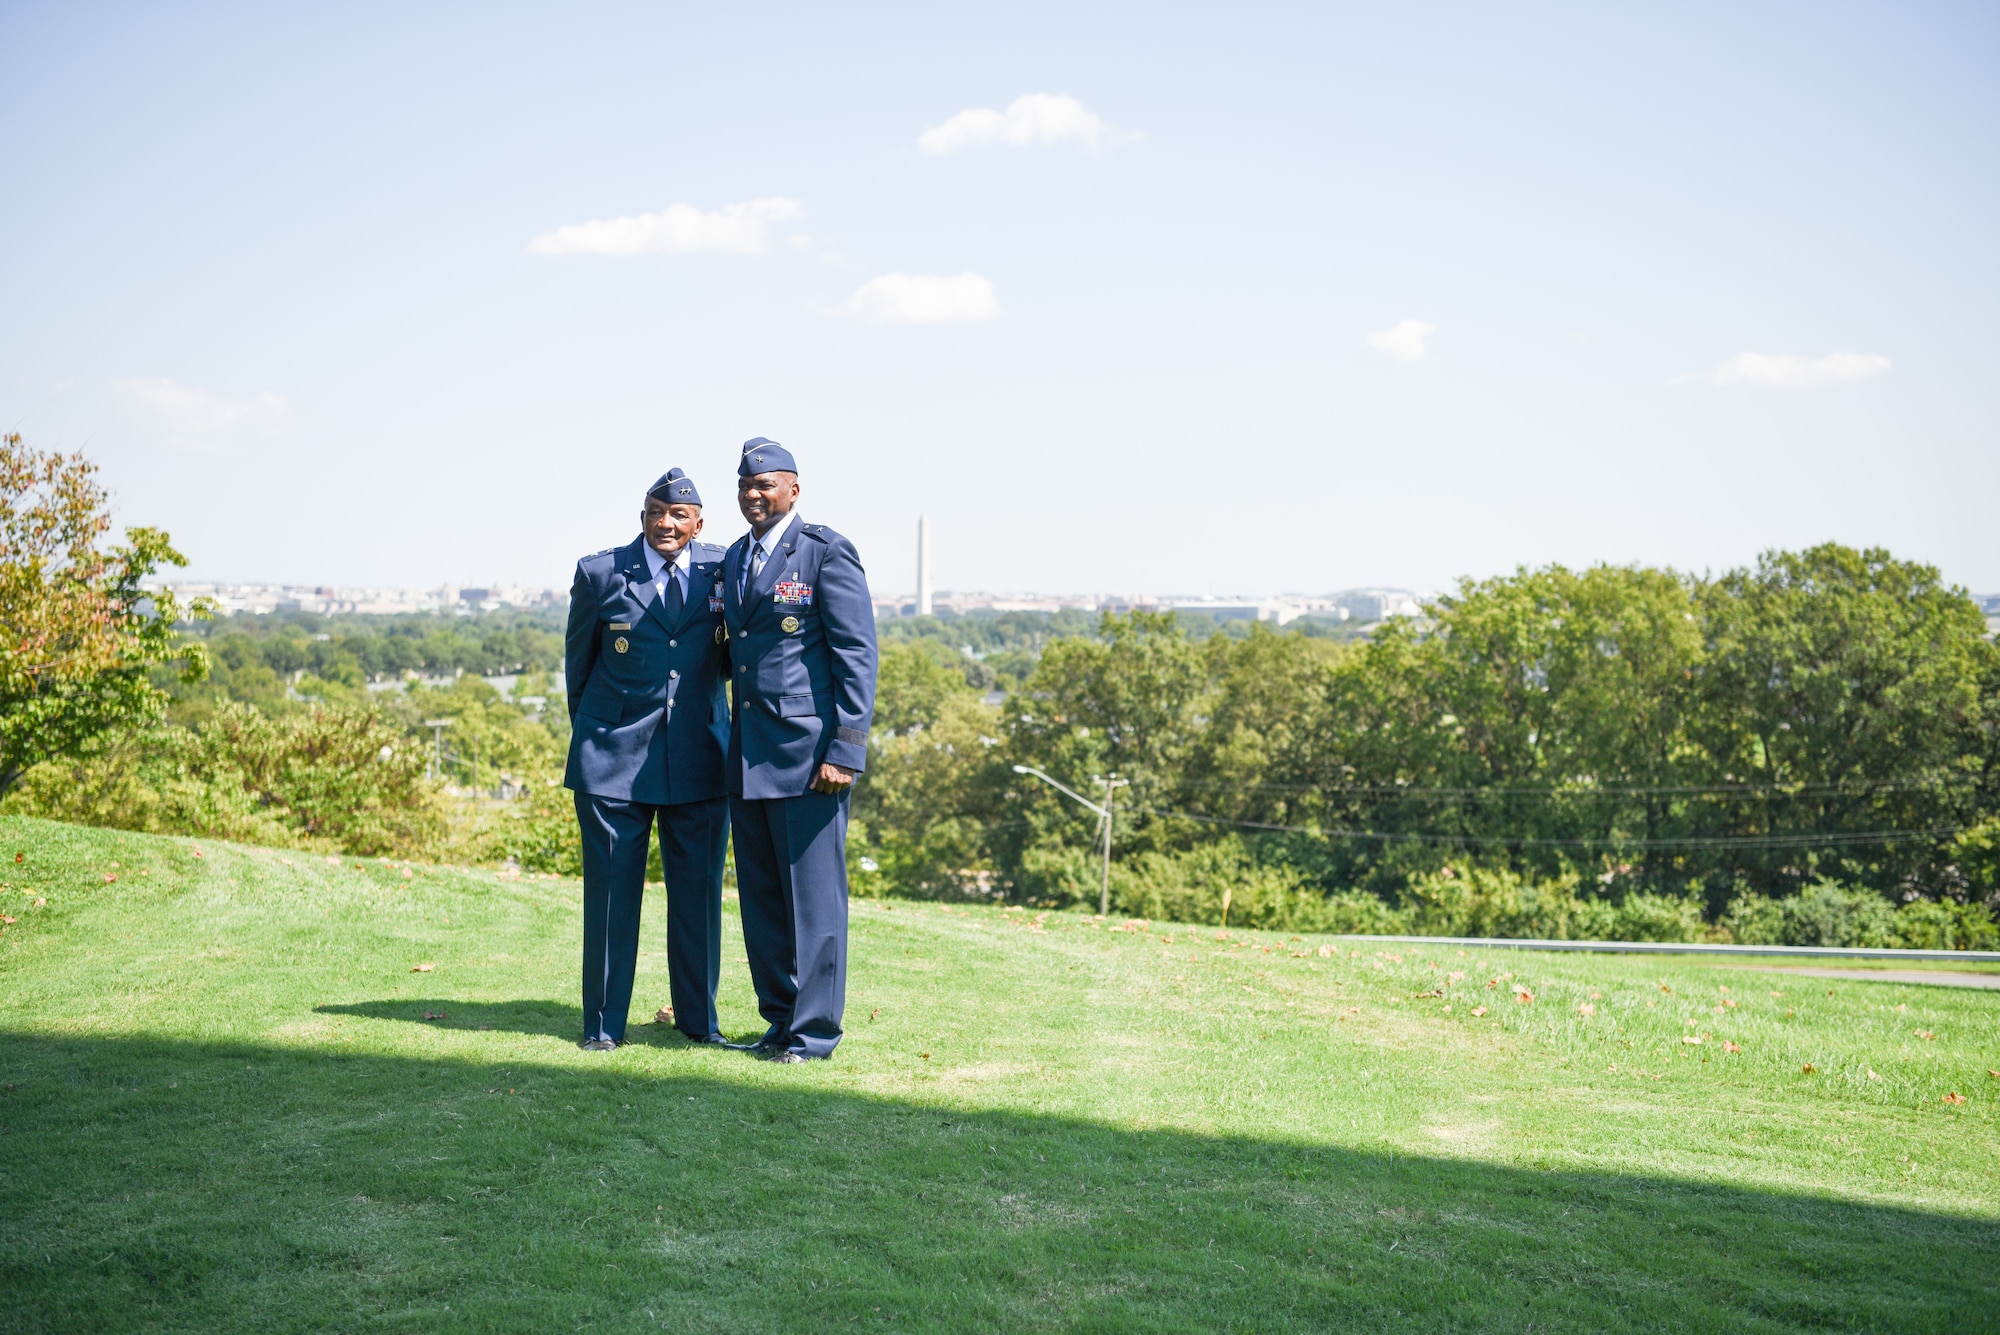 Image of two Airmen posing for a photo.